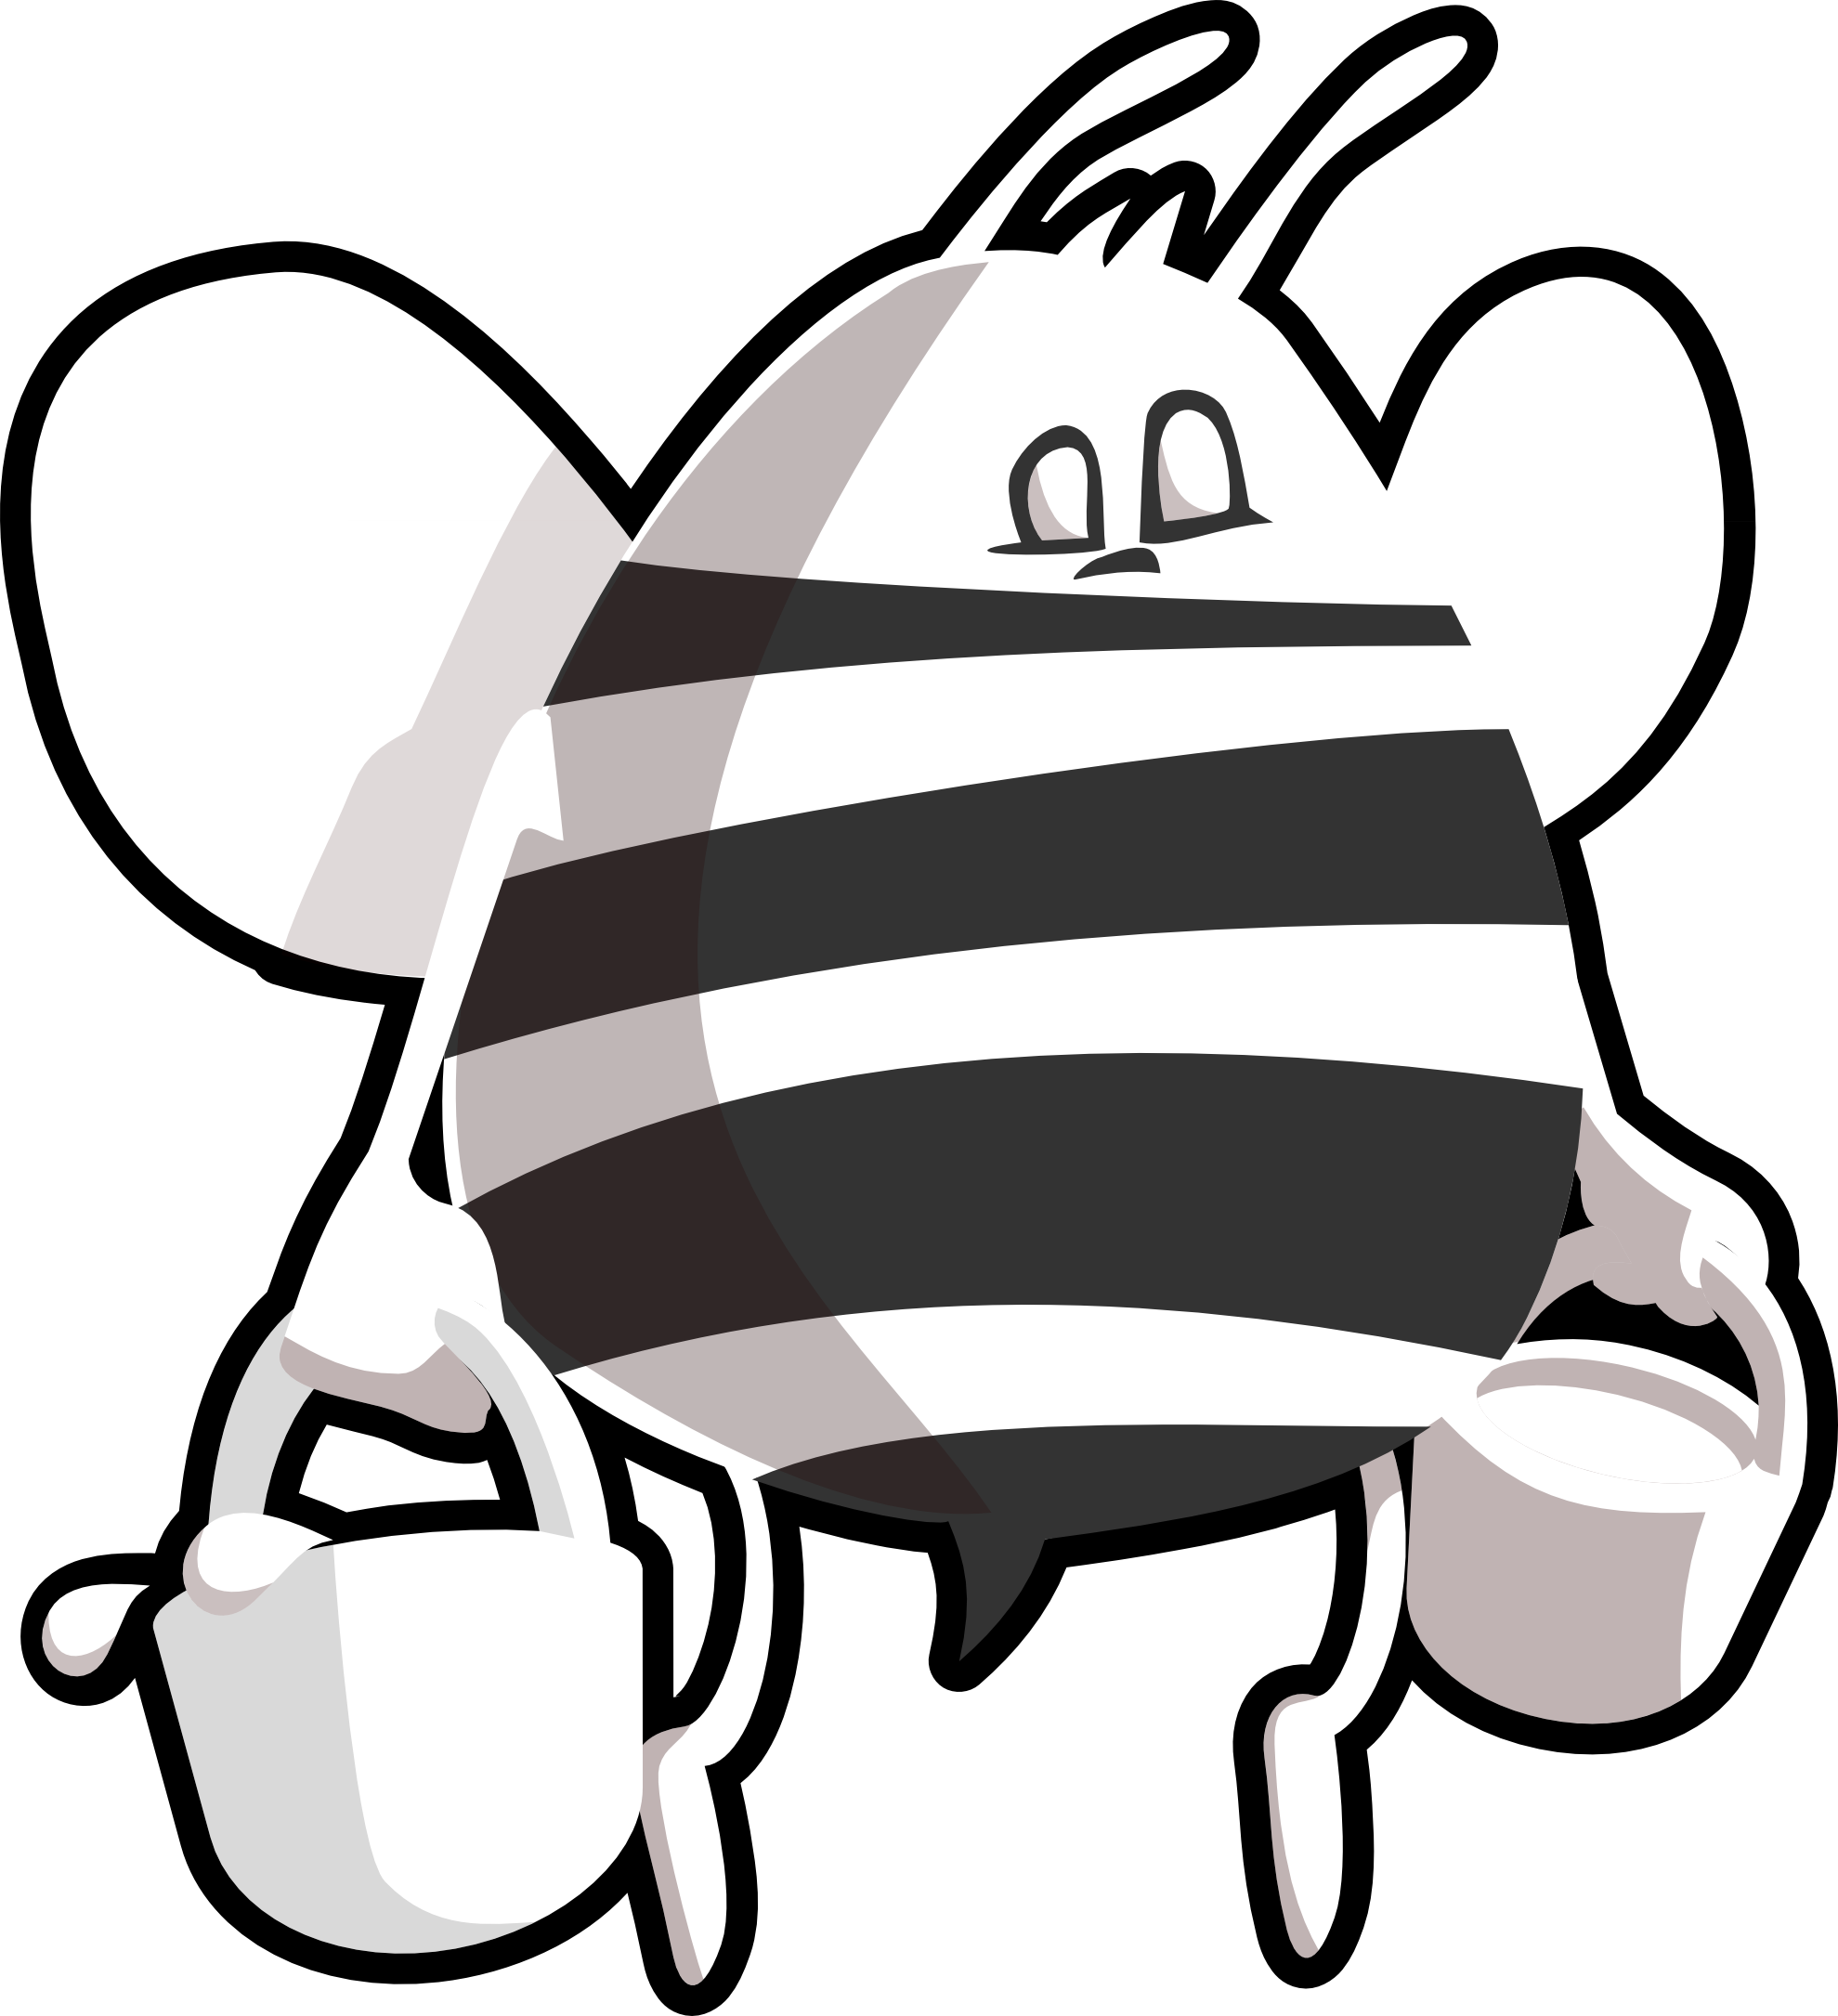 Bee Normal Black White Line Tzunghaor 1979px 291 - Bee Carrying Honey Shower Curtain (1979x2171)